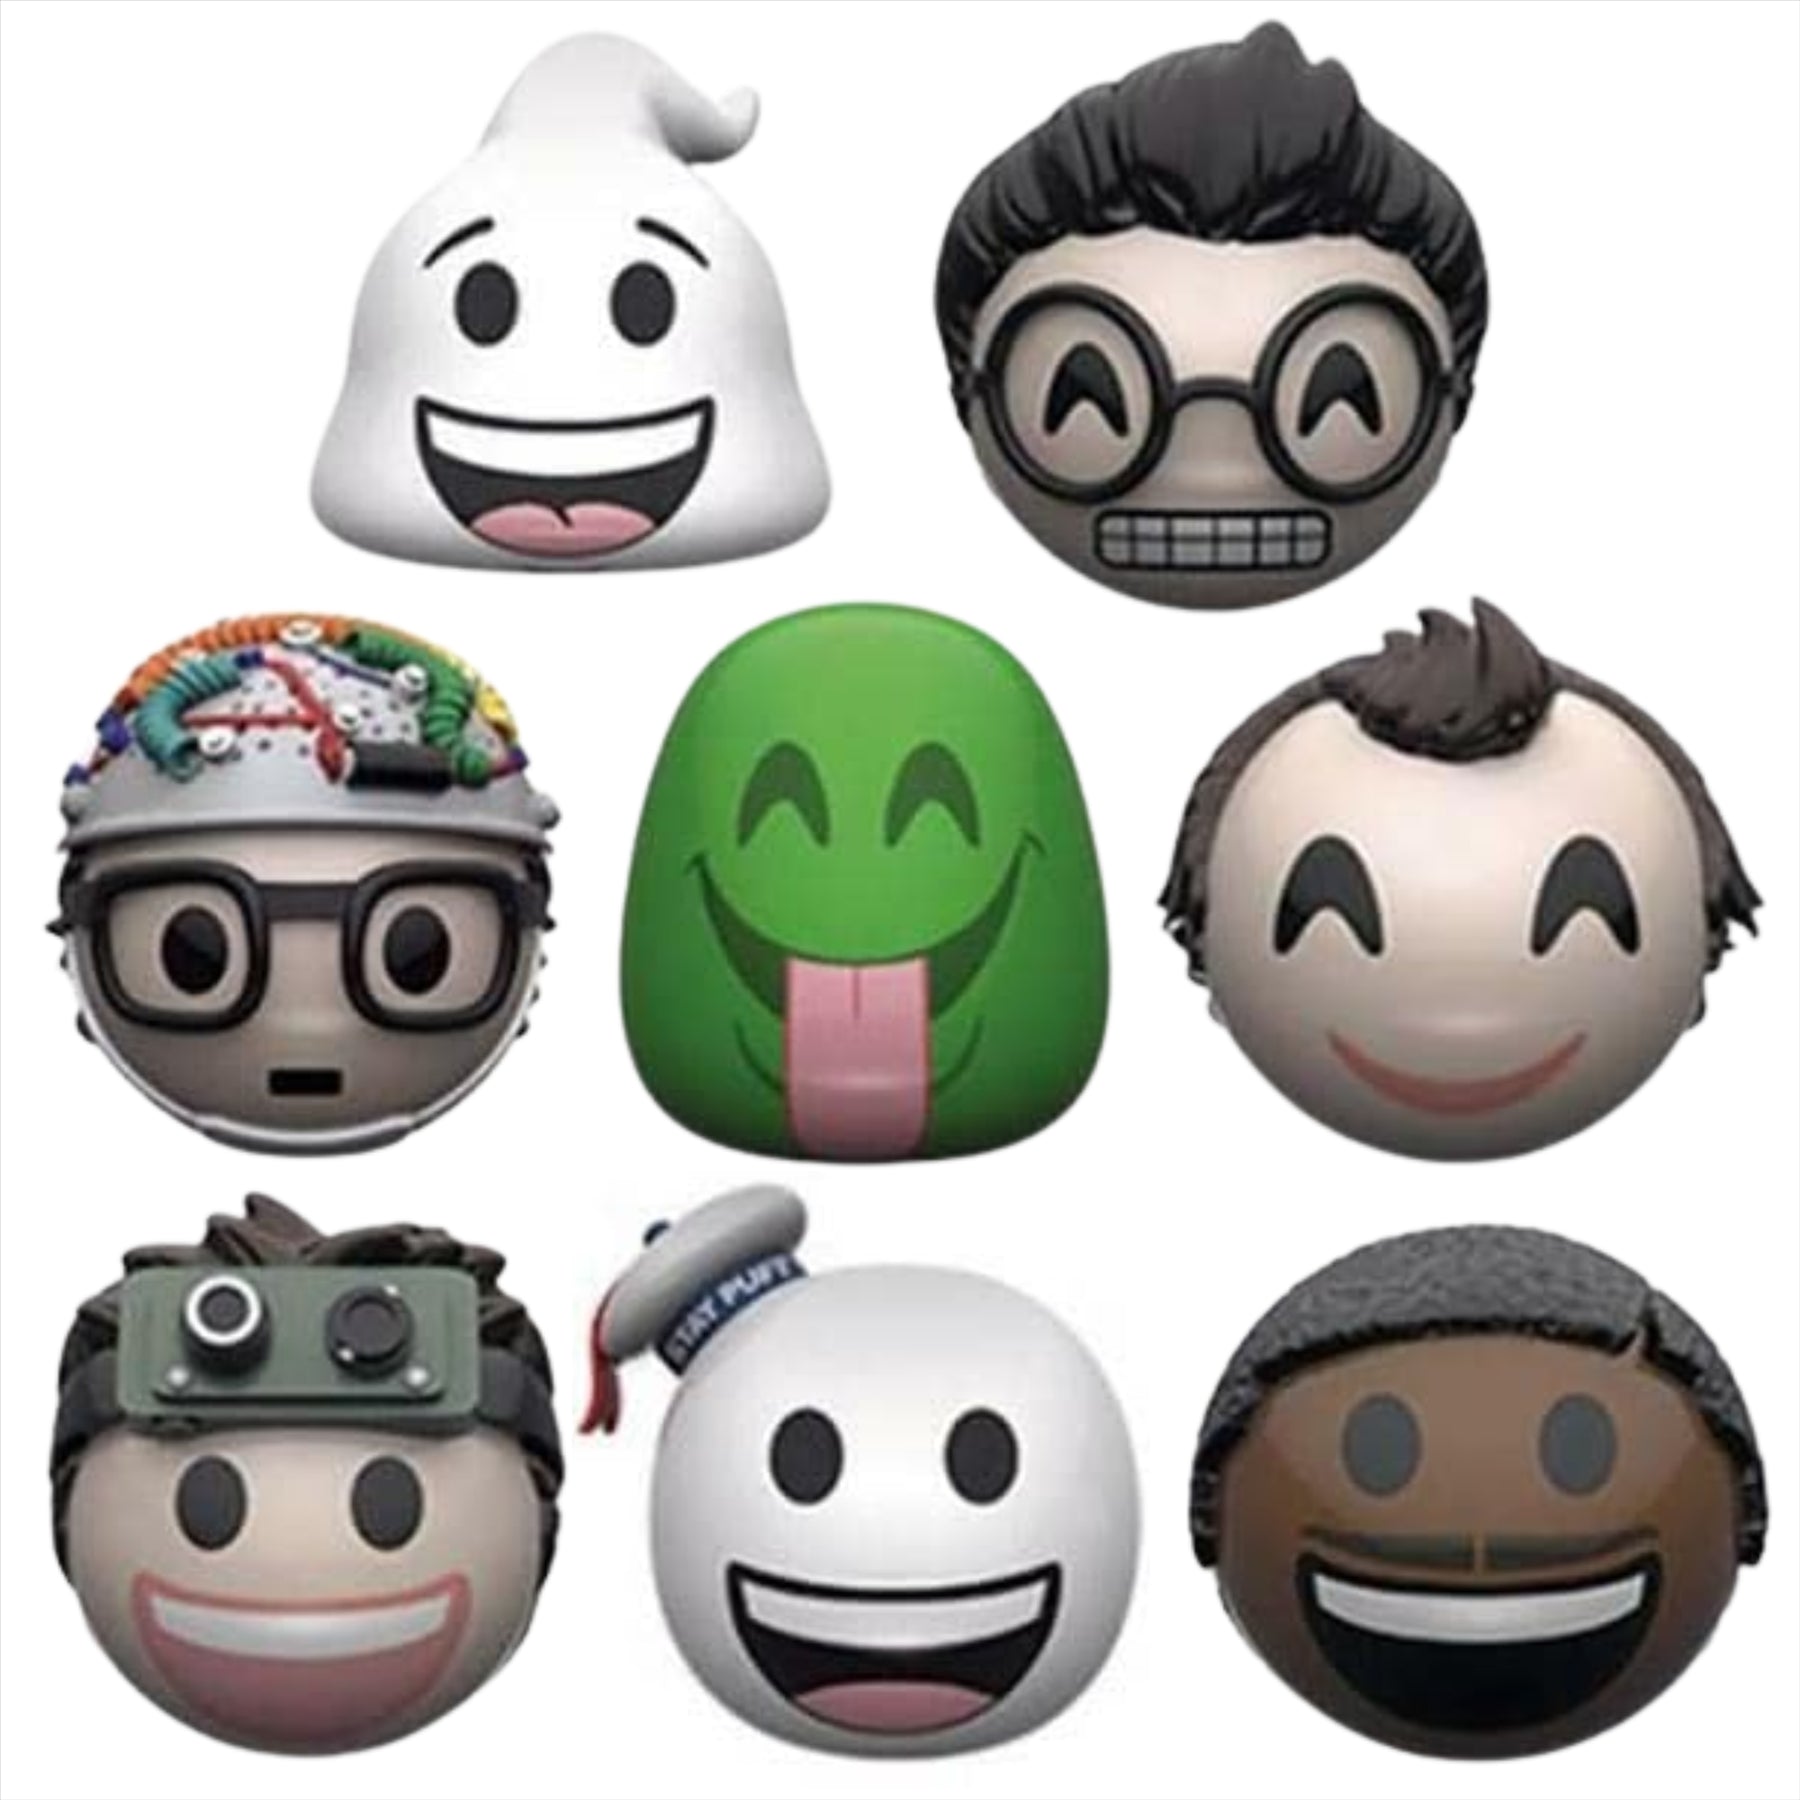 Ghostbusters - FunkoMyMoji Identified 4cm Collectible & Highly Detailed Figure Heads - Set 3 8-Pack - Toptoys2u